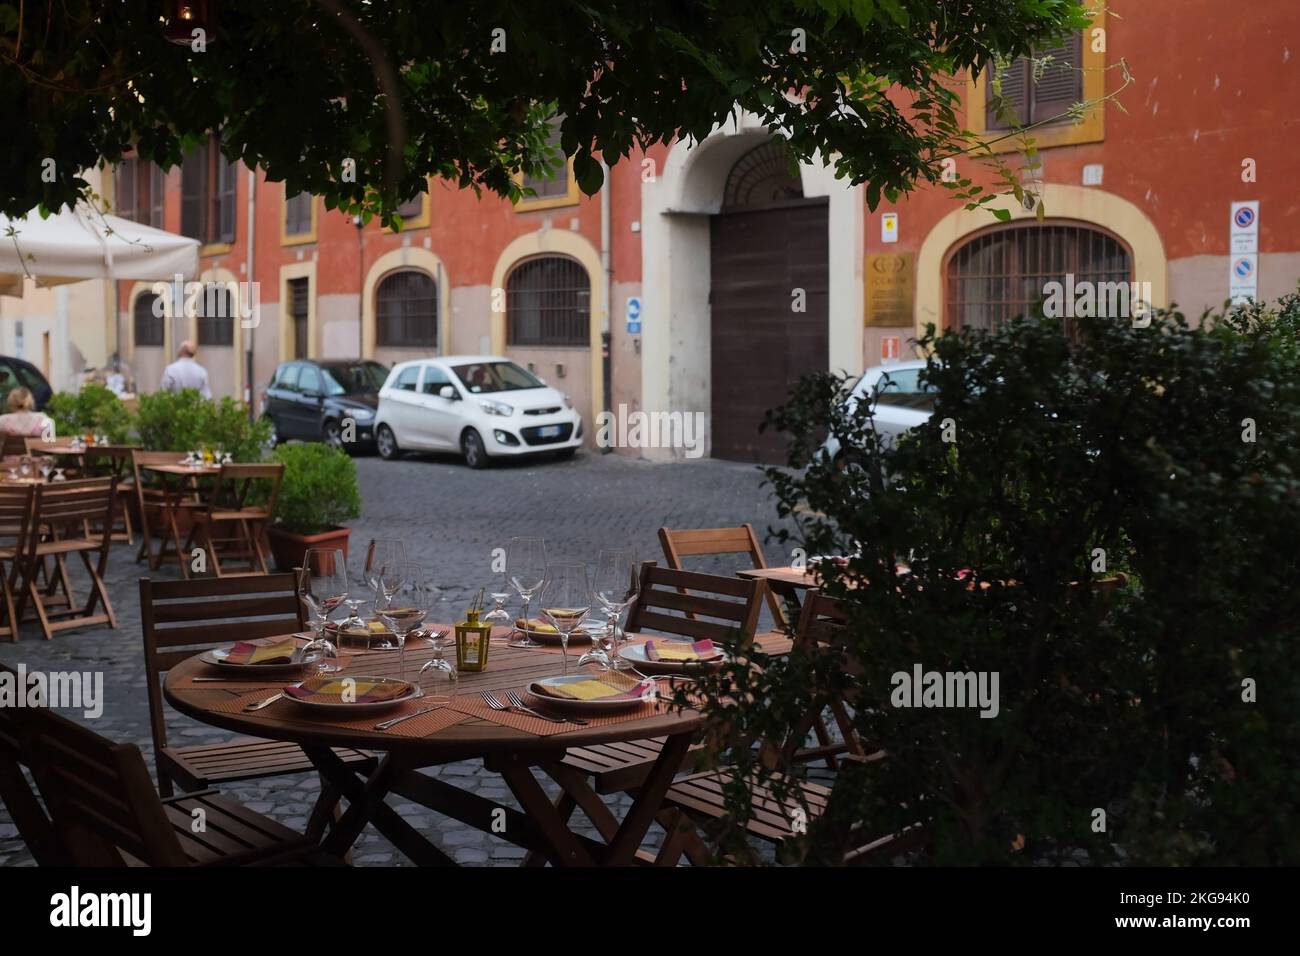 Cozy outdoor cafe table setting in the charming neighborhood of Trastevere. Al fresco restaurant dining setup along a cobblestone street in Rome, Italy. Stock Photo